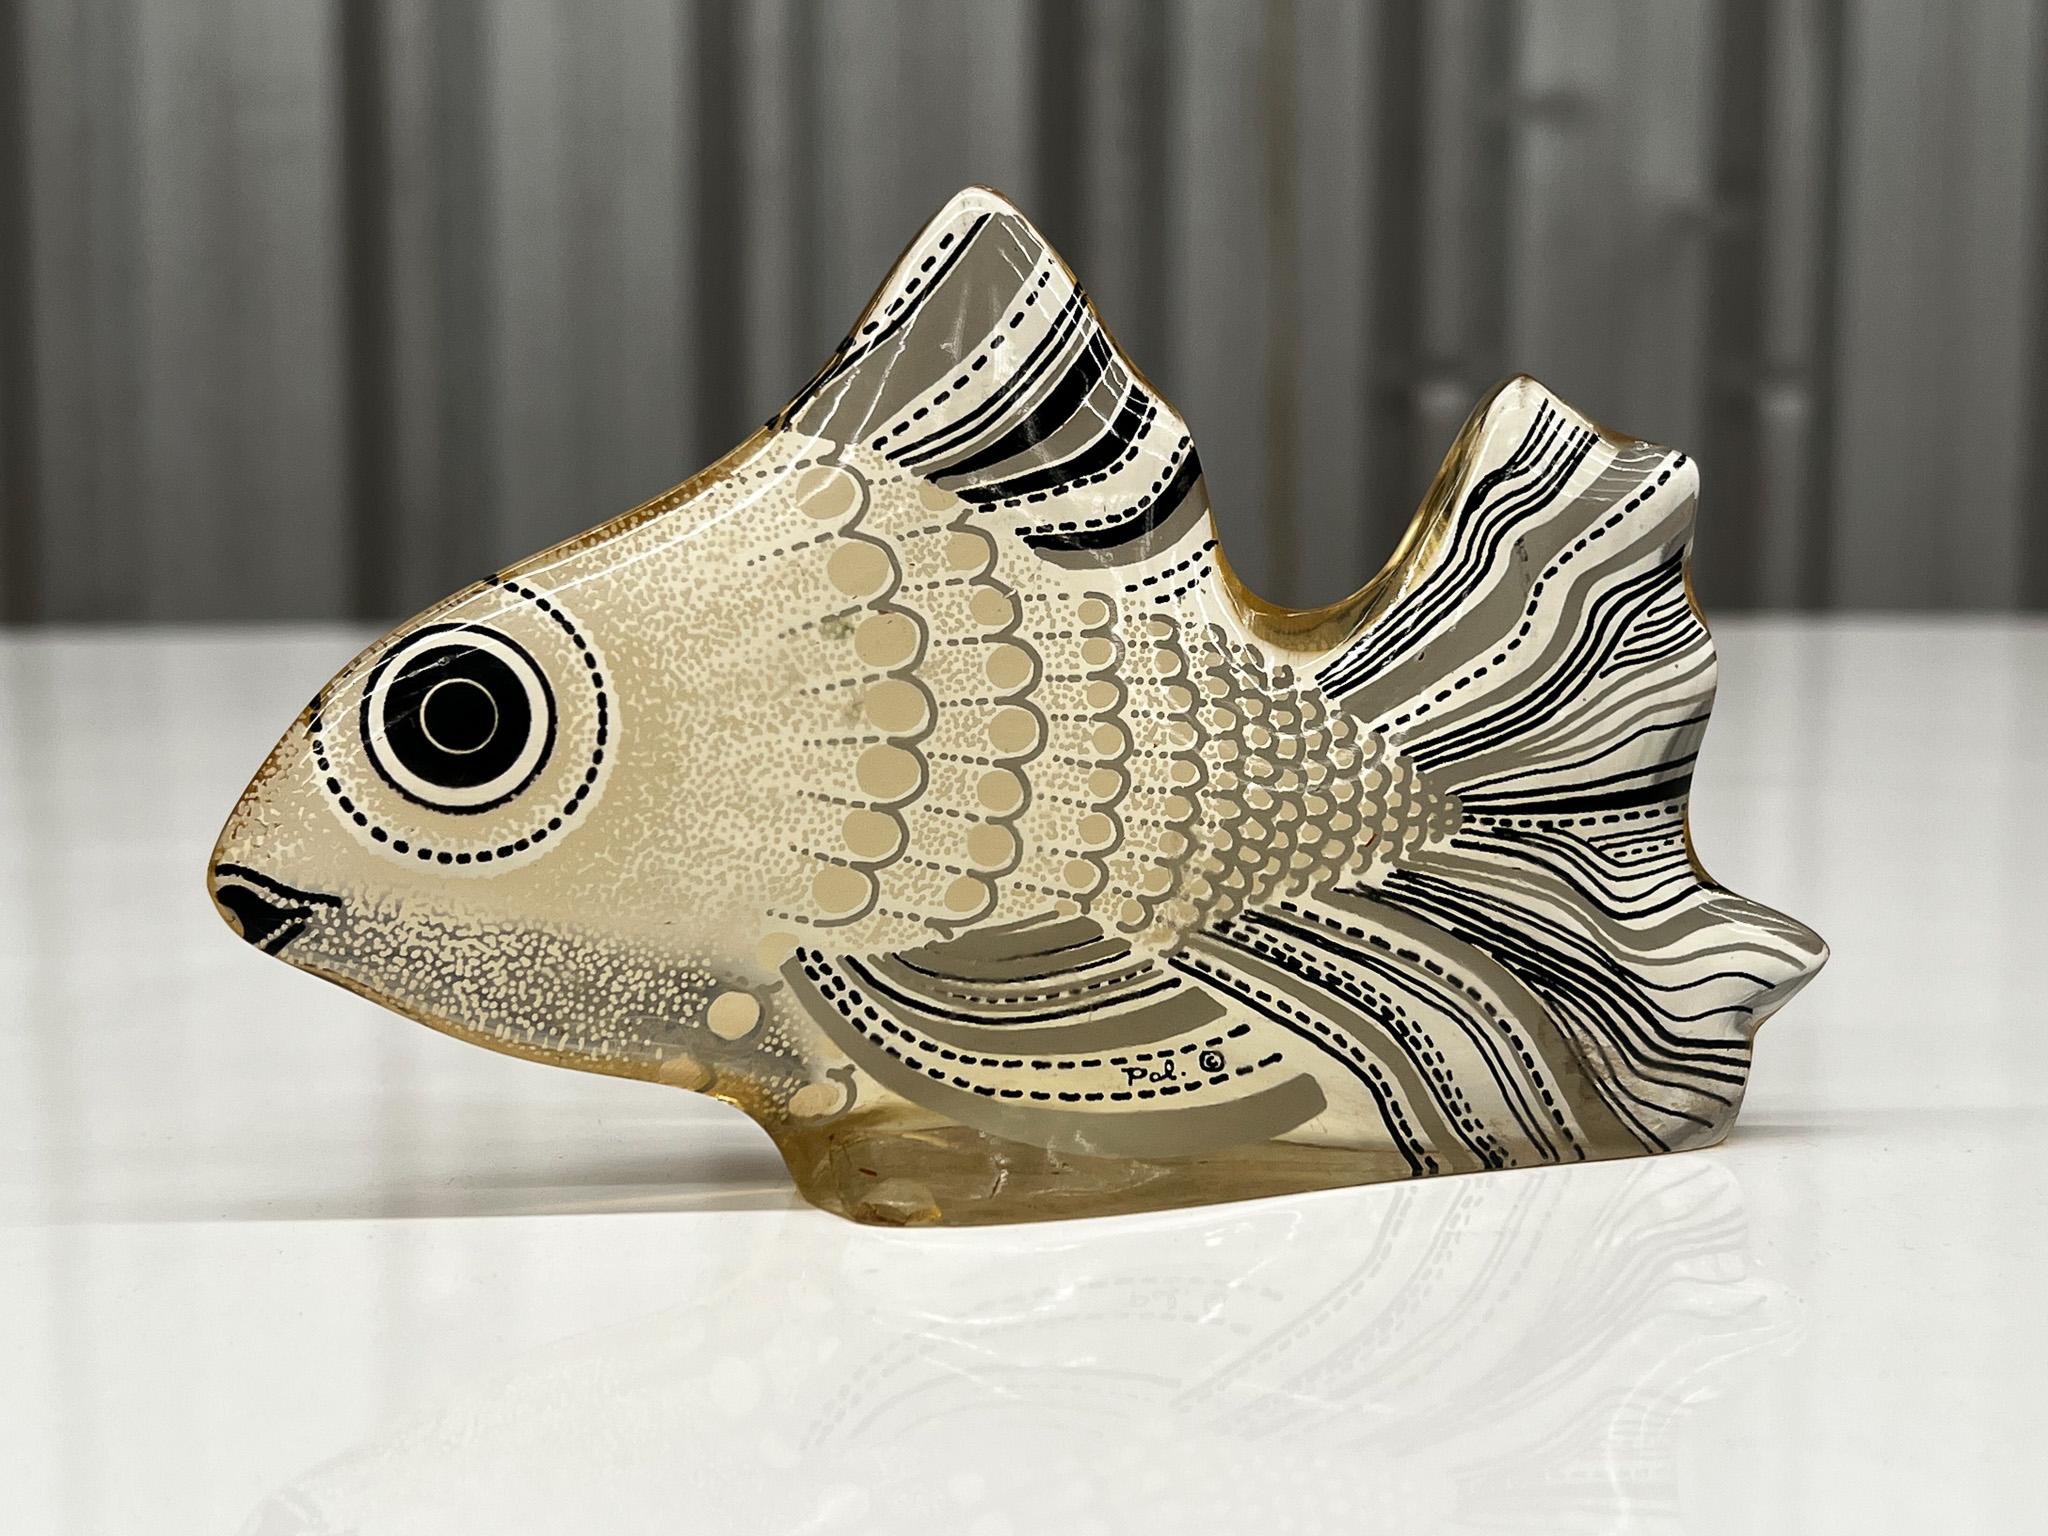 This Brazilian modern sculpture was designed by Abraham Palatinik and made in the 1960s. It is a part of the Artemis collection that features hundreds of different animals, each with sleek, flat silhouettes. The goldfish sculpture is made with resin